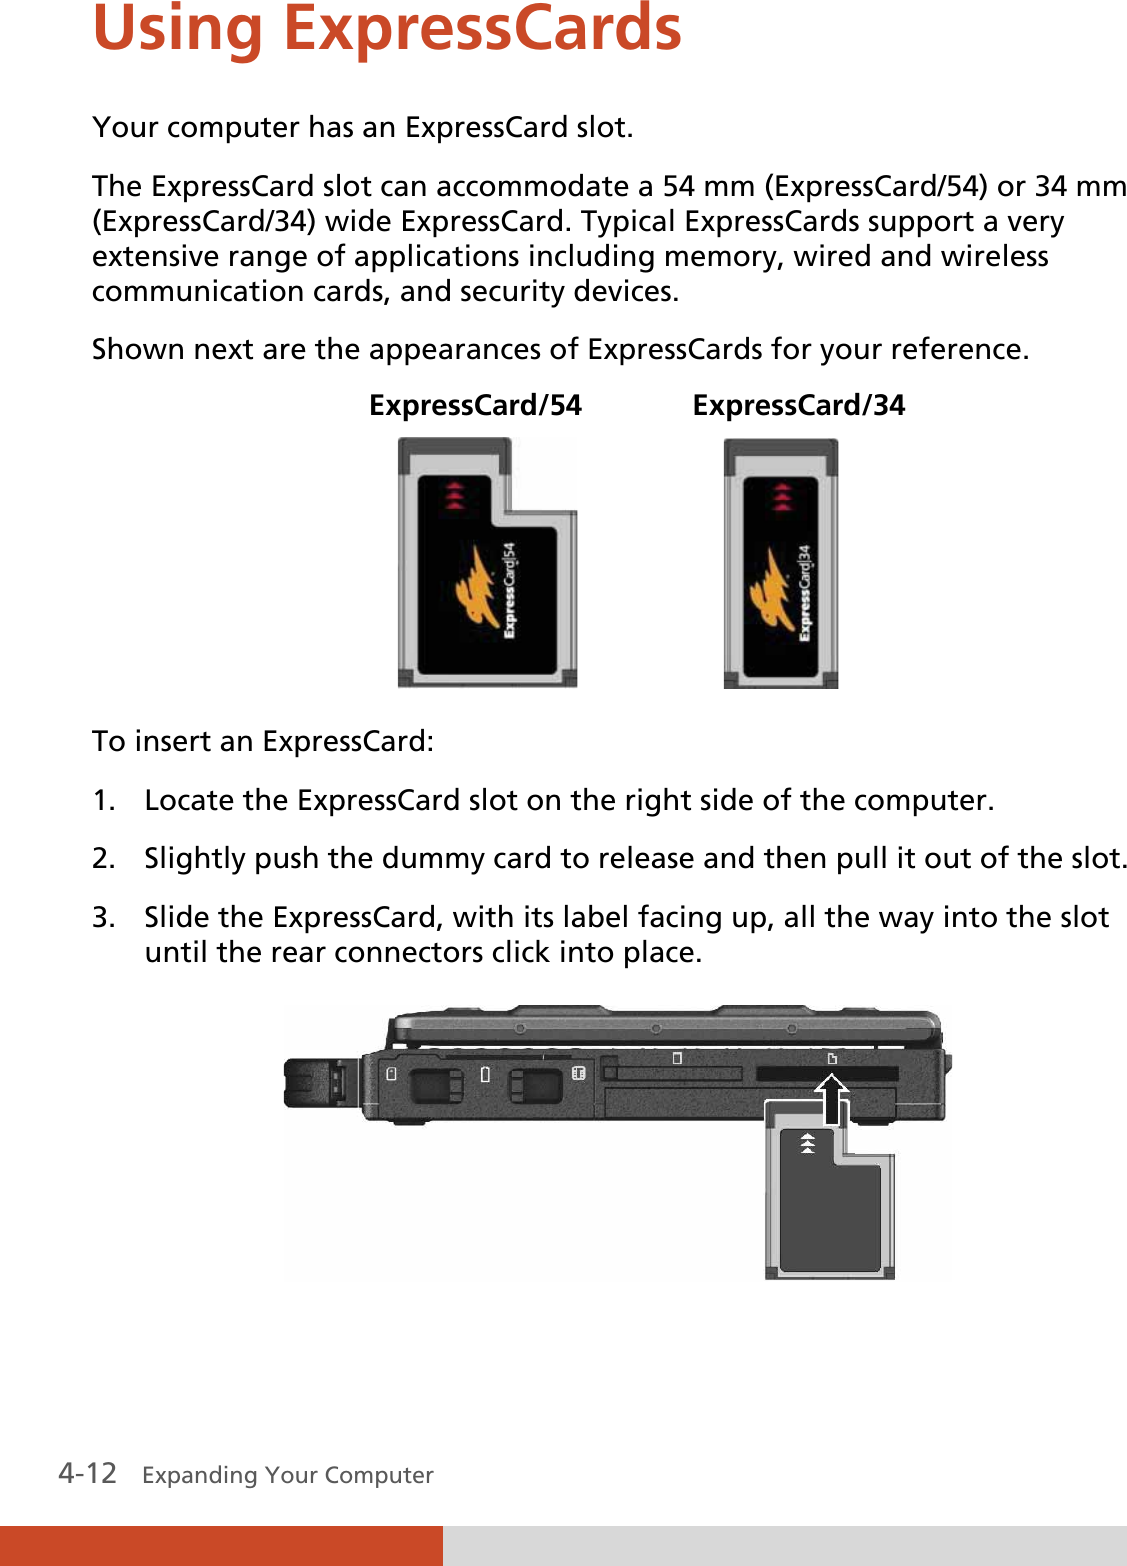  4-12   Expanding Your Computer  Using ExpressCards Your computer has an ExpressCard slot. The ExpressCard slot can accommodate a 54 mm (ExpressCard/54) or 34 mm (ExpressCard/34) wide ExpressCard. Typical ExpressCards support a very extensive range of applications including memory, wired and wireless communication cards, and security devices. Shown next are the appearances of ExpressCards for your reference.  ExpressCard/54   ExpressCard/34                     To insert an ExpressCard: 1. Locate the ExpressCard slot on the right side of the computer. 2. Slightly push the dummy card to release and then pull it out of the slot. 3. Slide the ExpressCard, with its label facing up, all the way into the slot until the rear connectors click into place.  